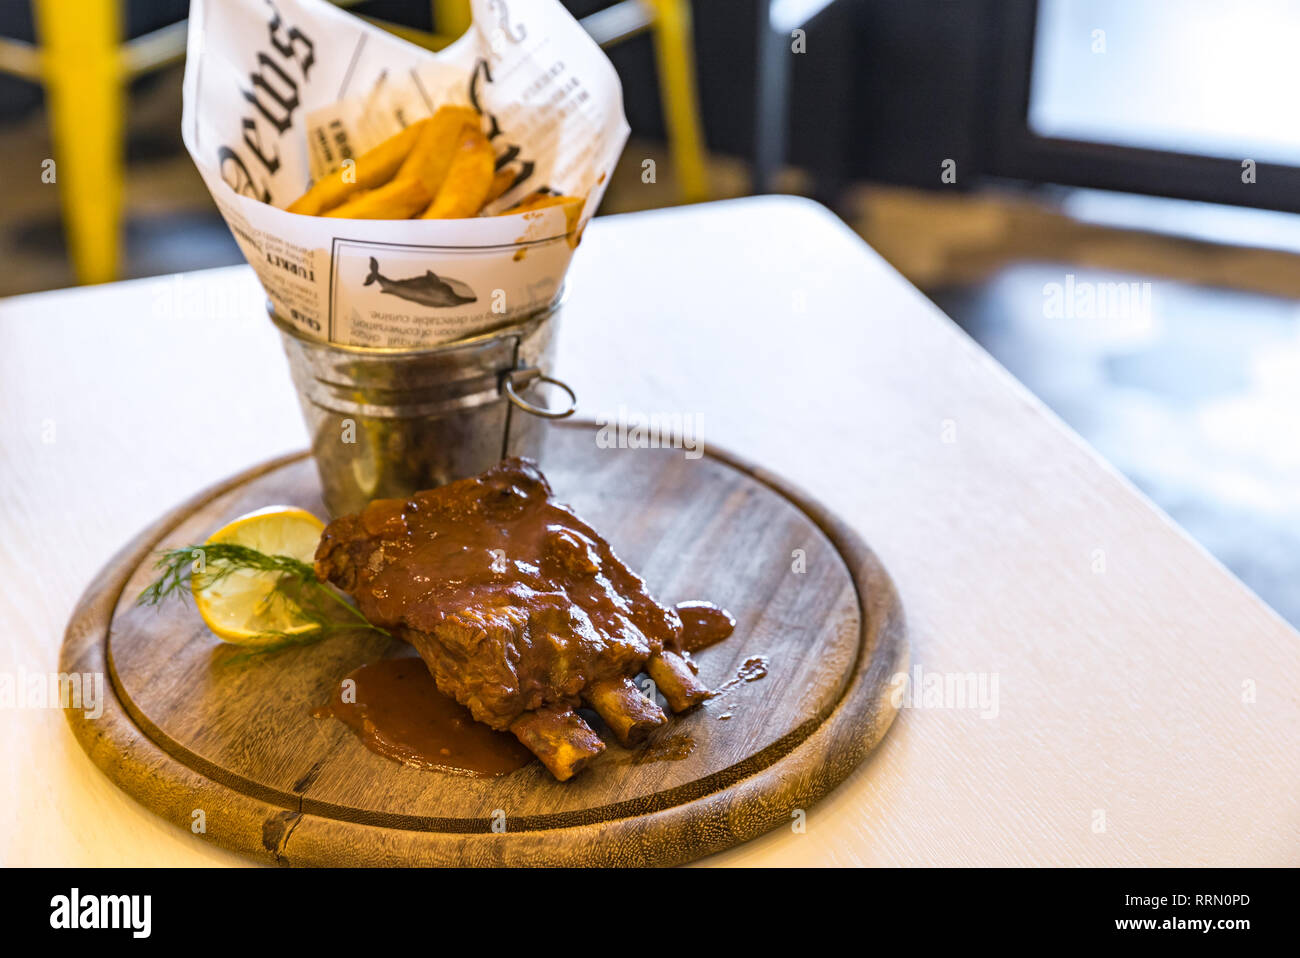 Pork Rib with Fries on wooden plate Stock Photo